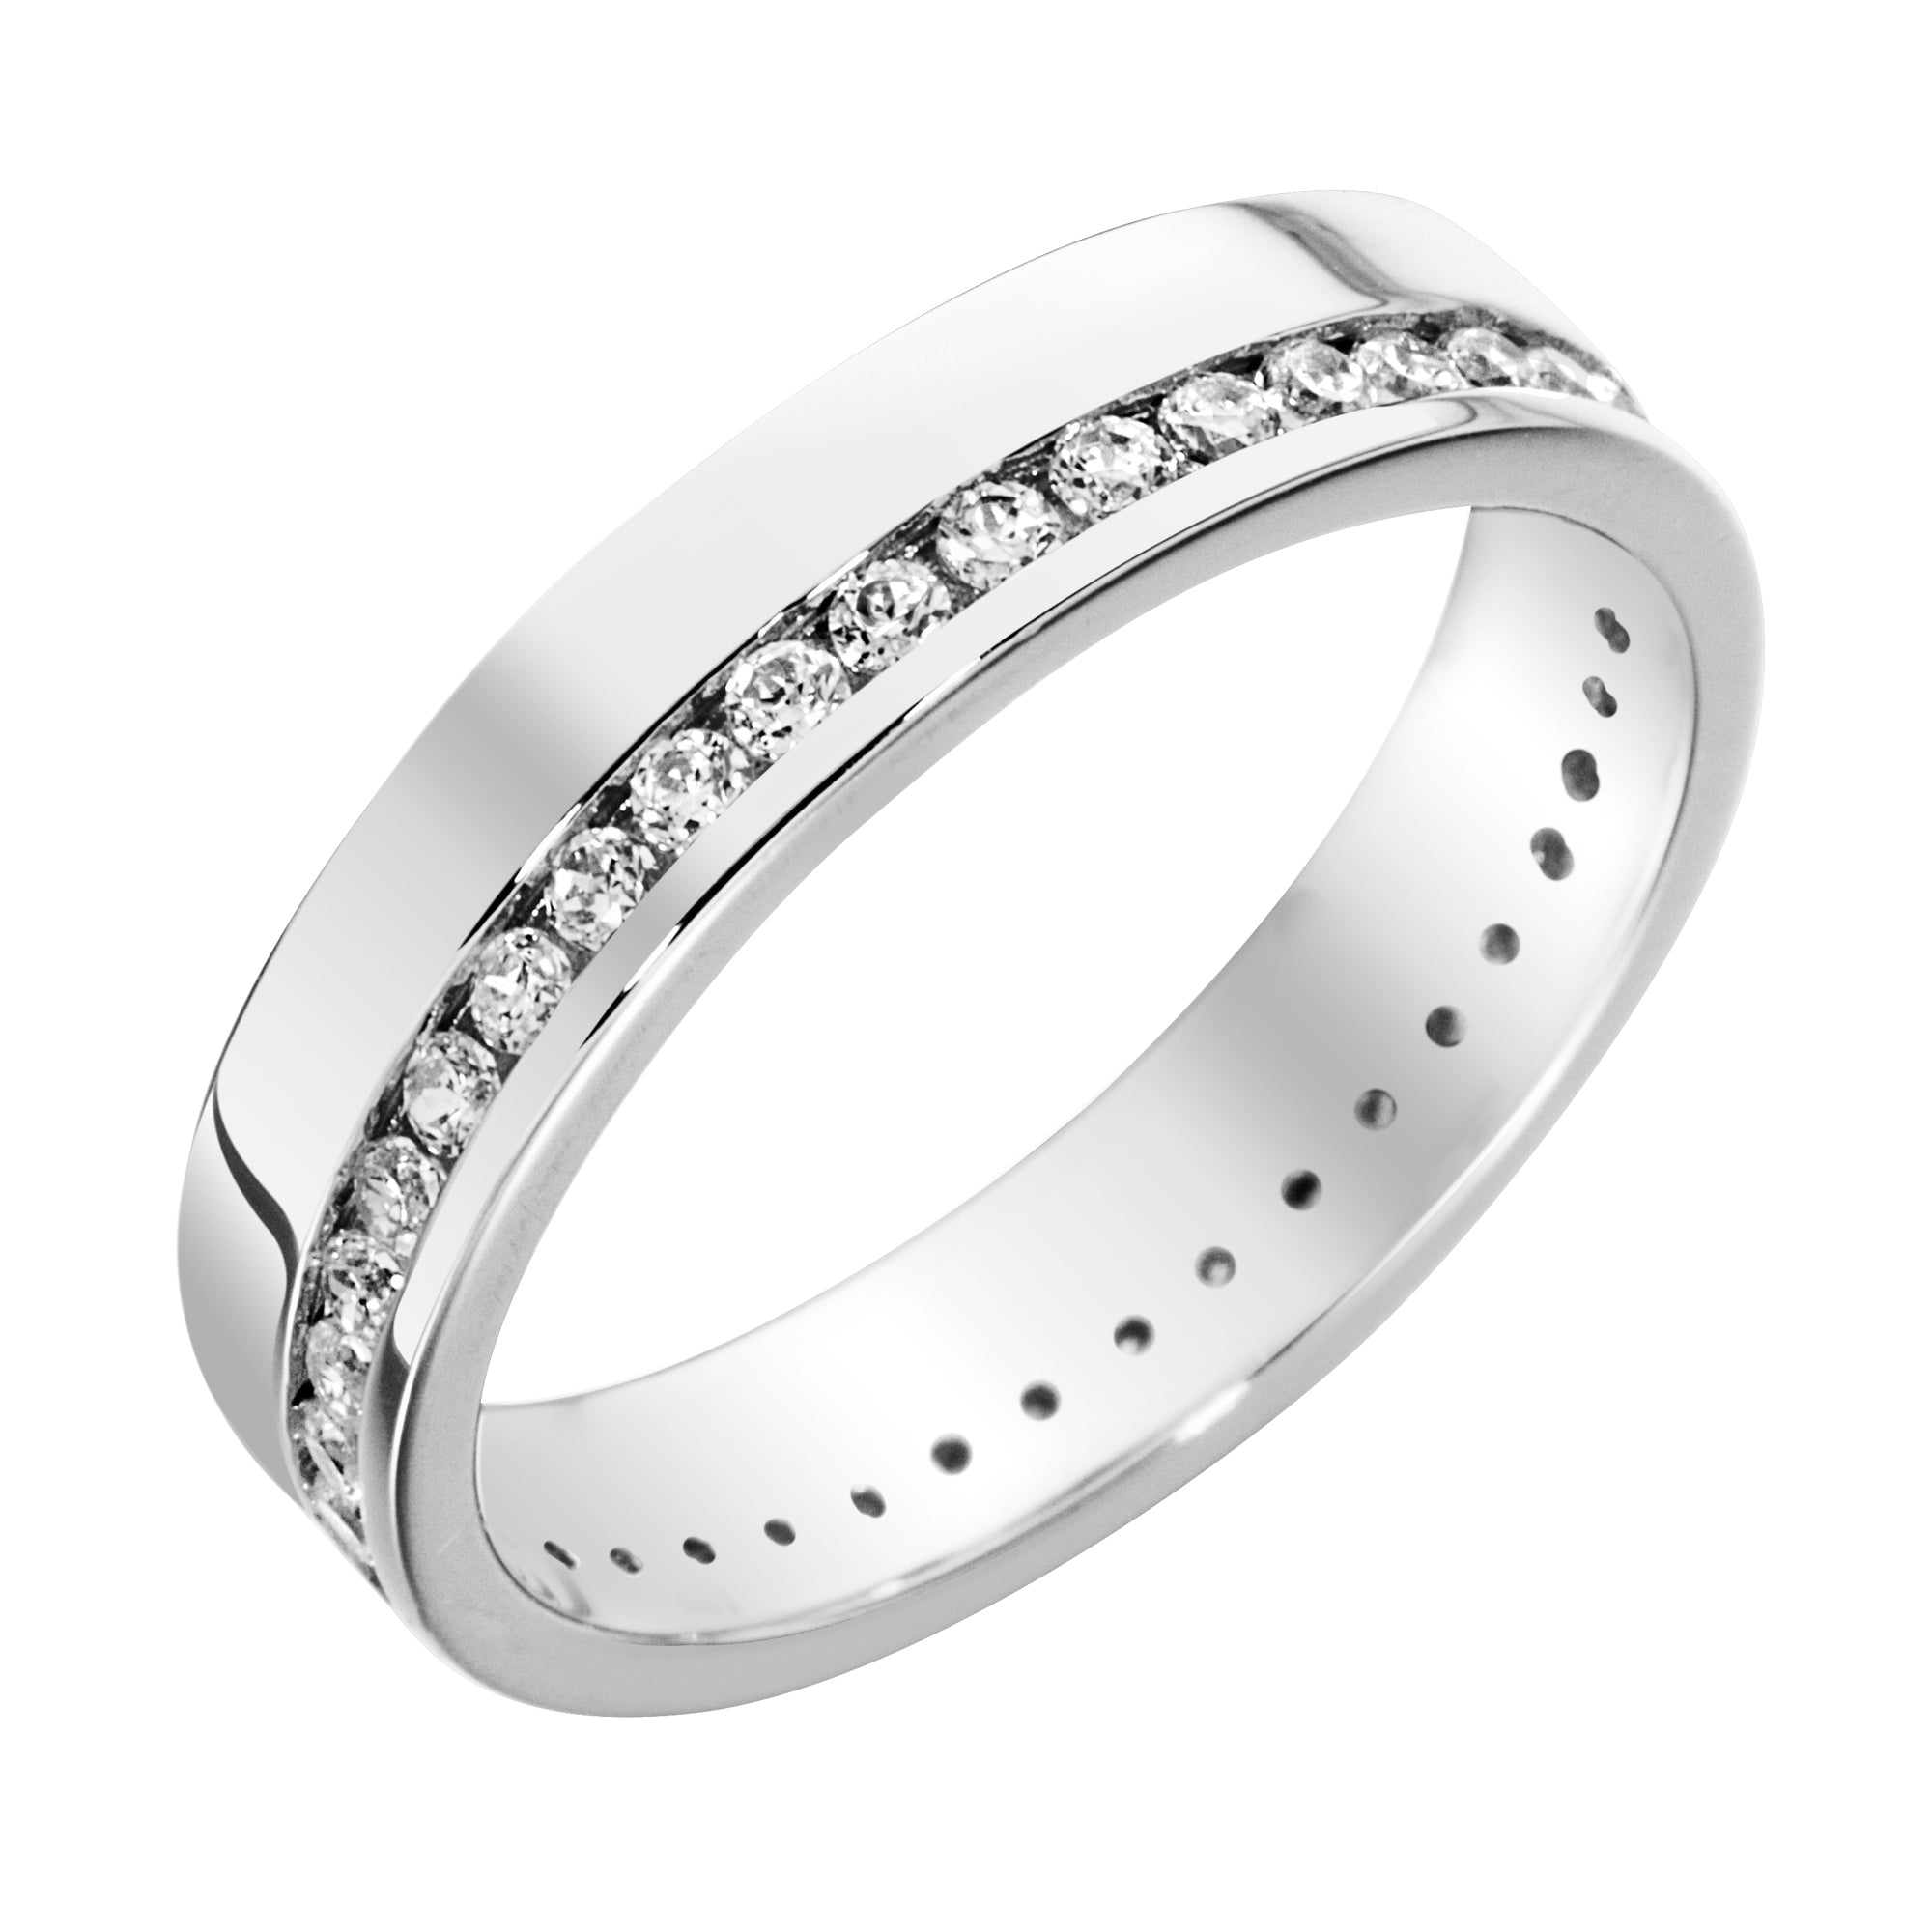 Sterling Silver Cubic Zirconia Ring - AK1007 - Hallmark Jewellers Formby & The Jewellers Bench Widnes